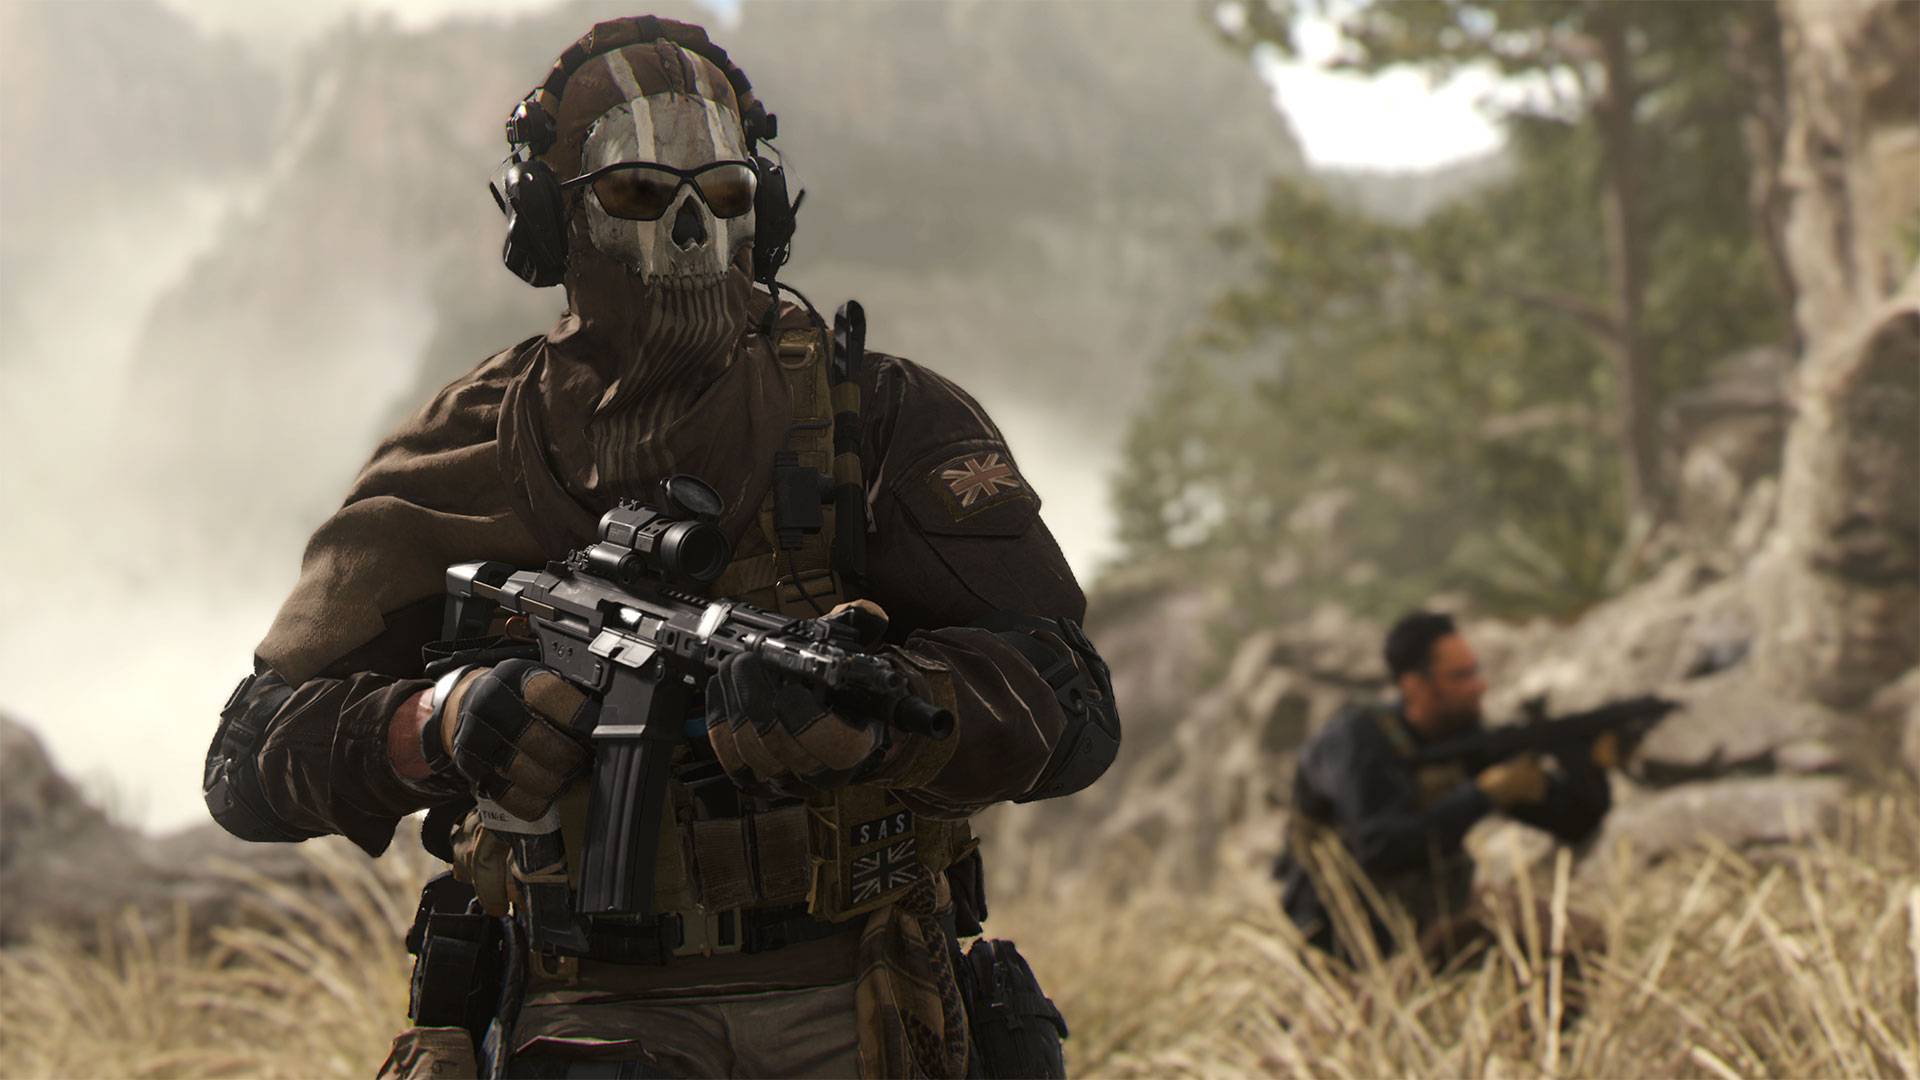 Leaks about Call of Duty: Modern Warfare 2 keep piling up